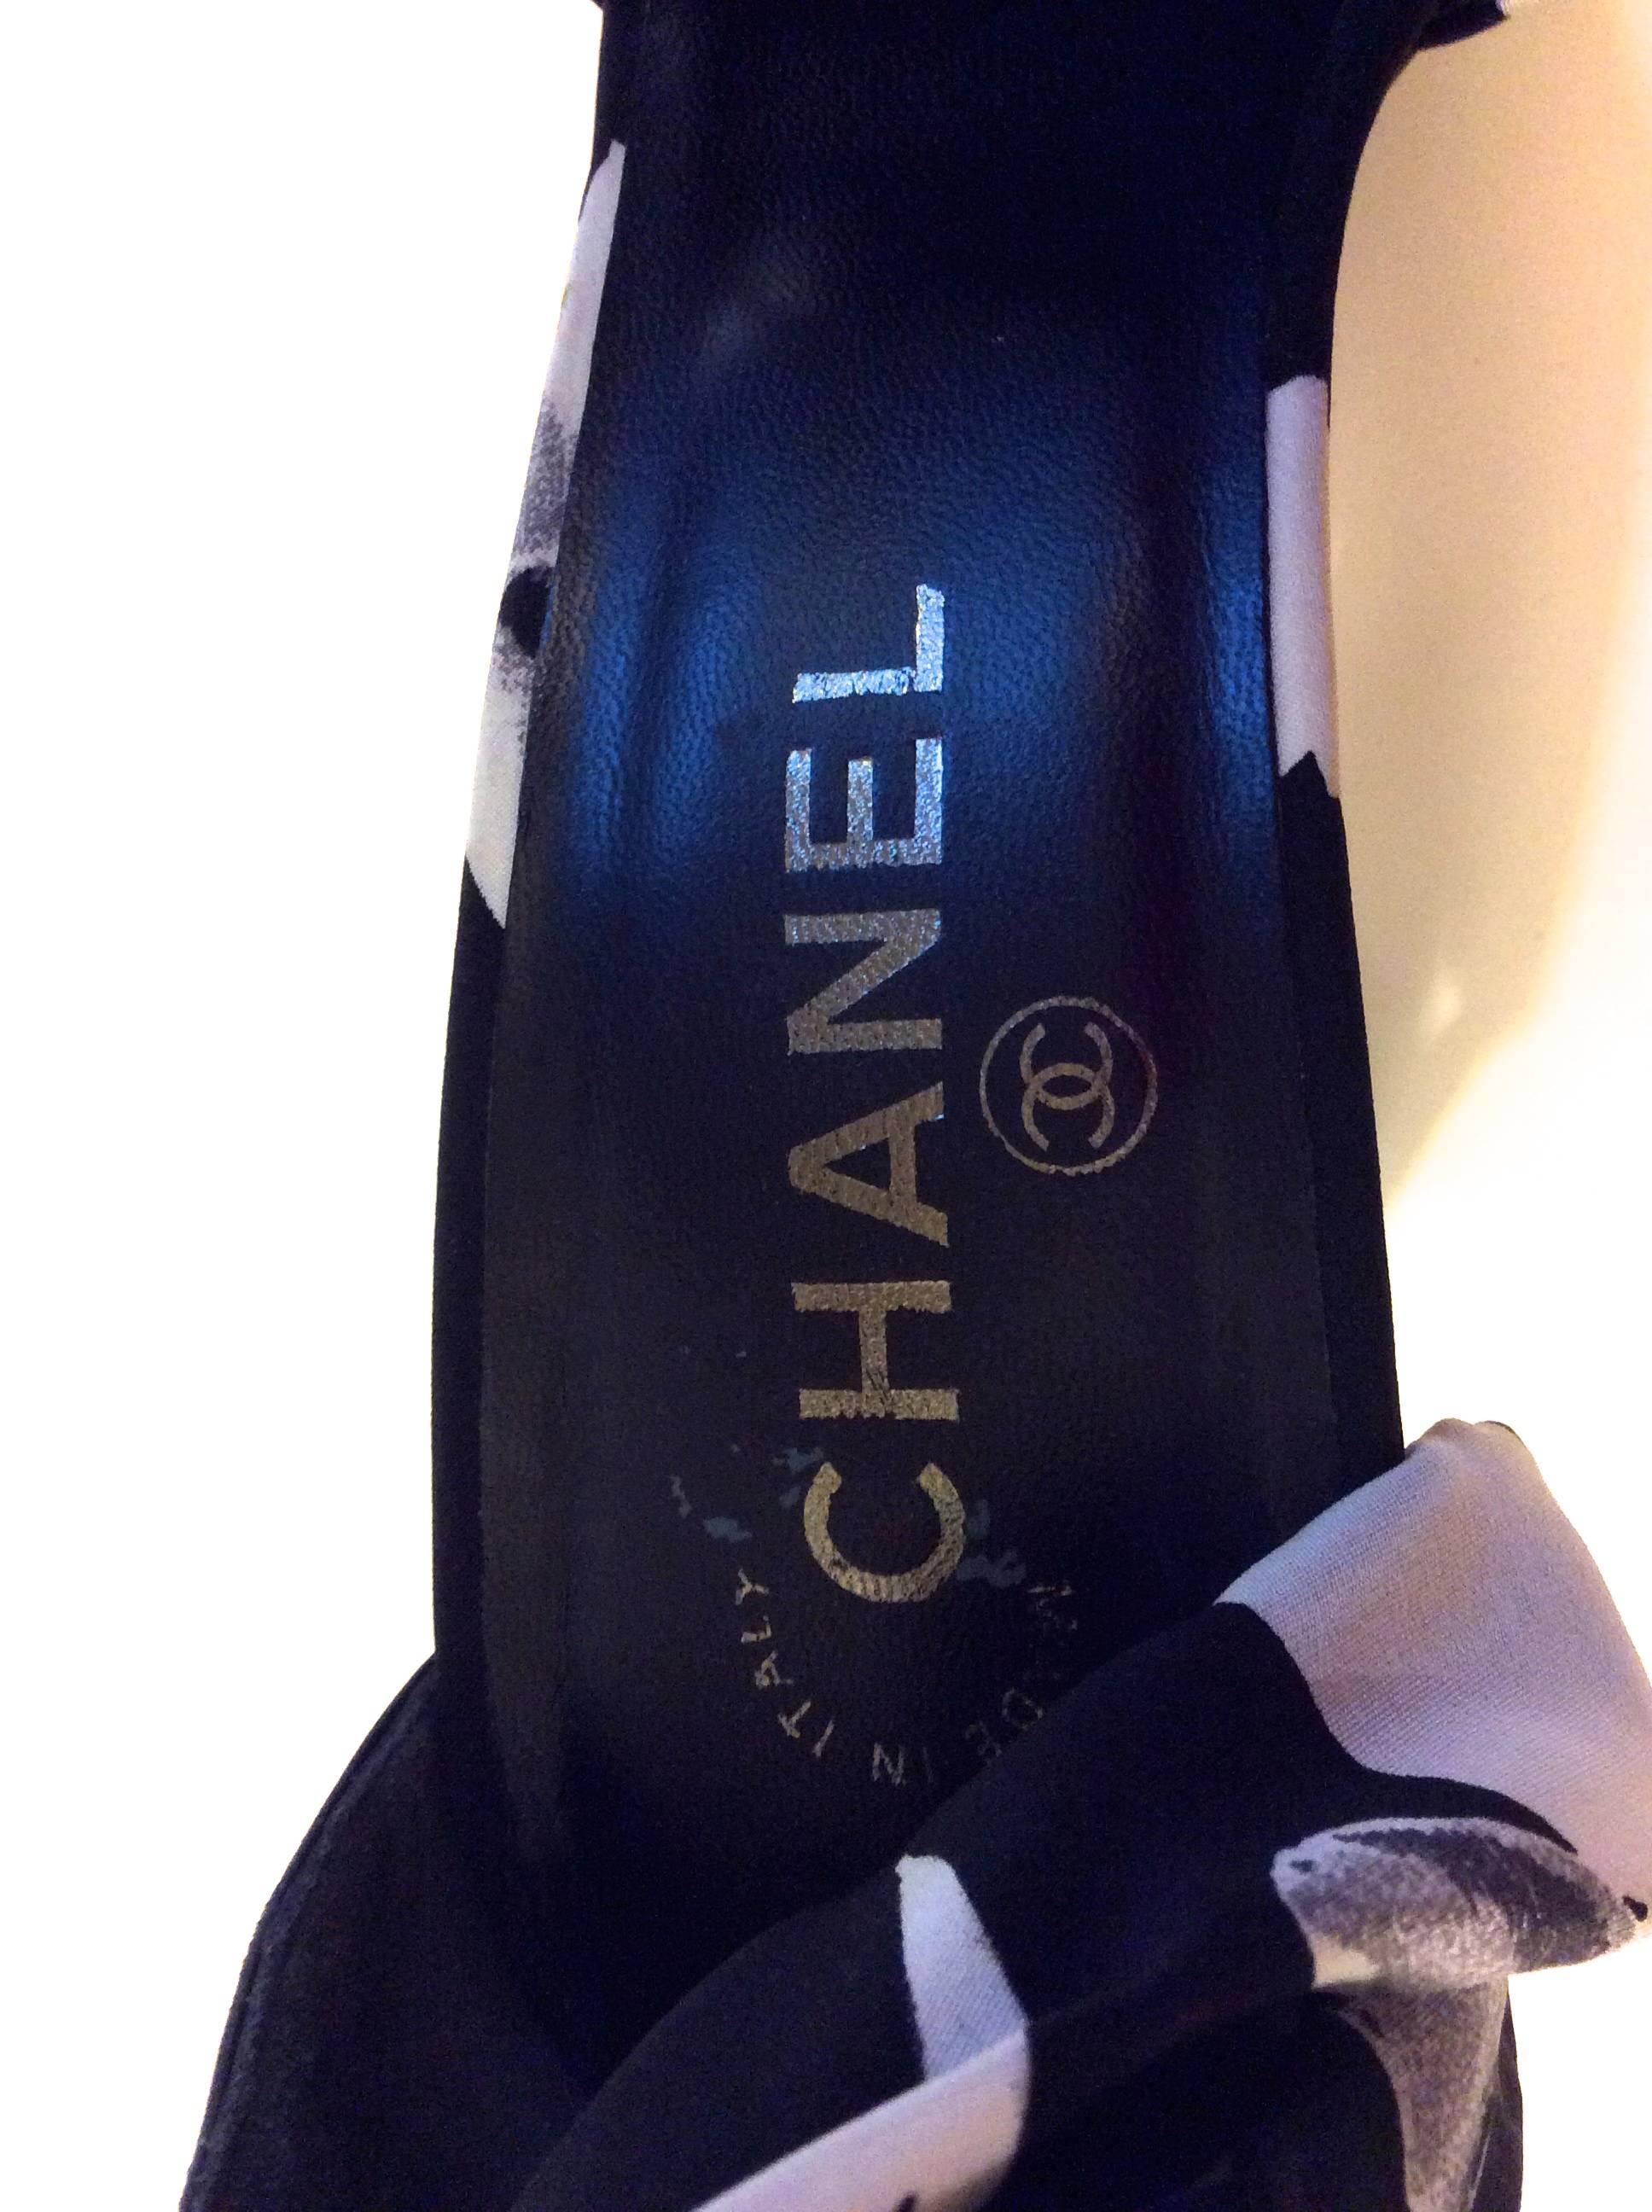 Chanel Heels - Size 39.5 - Black Leather w/ Silk For Sale 6